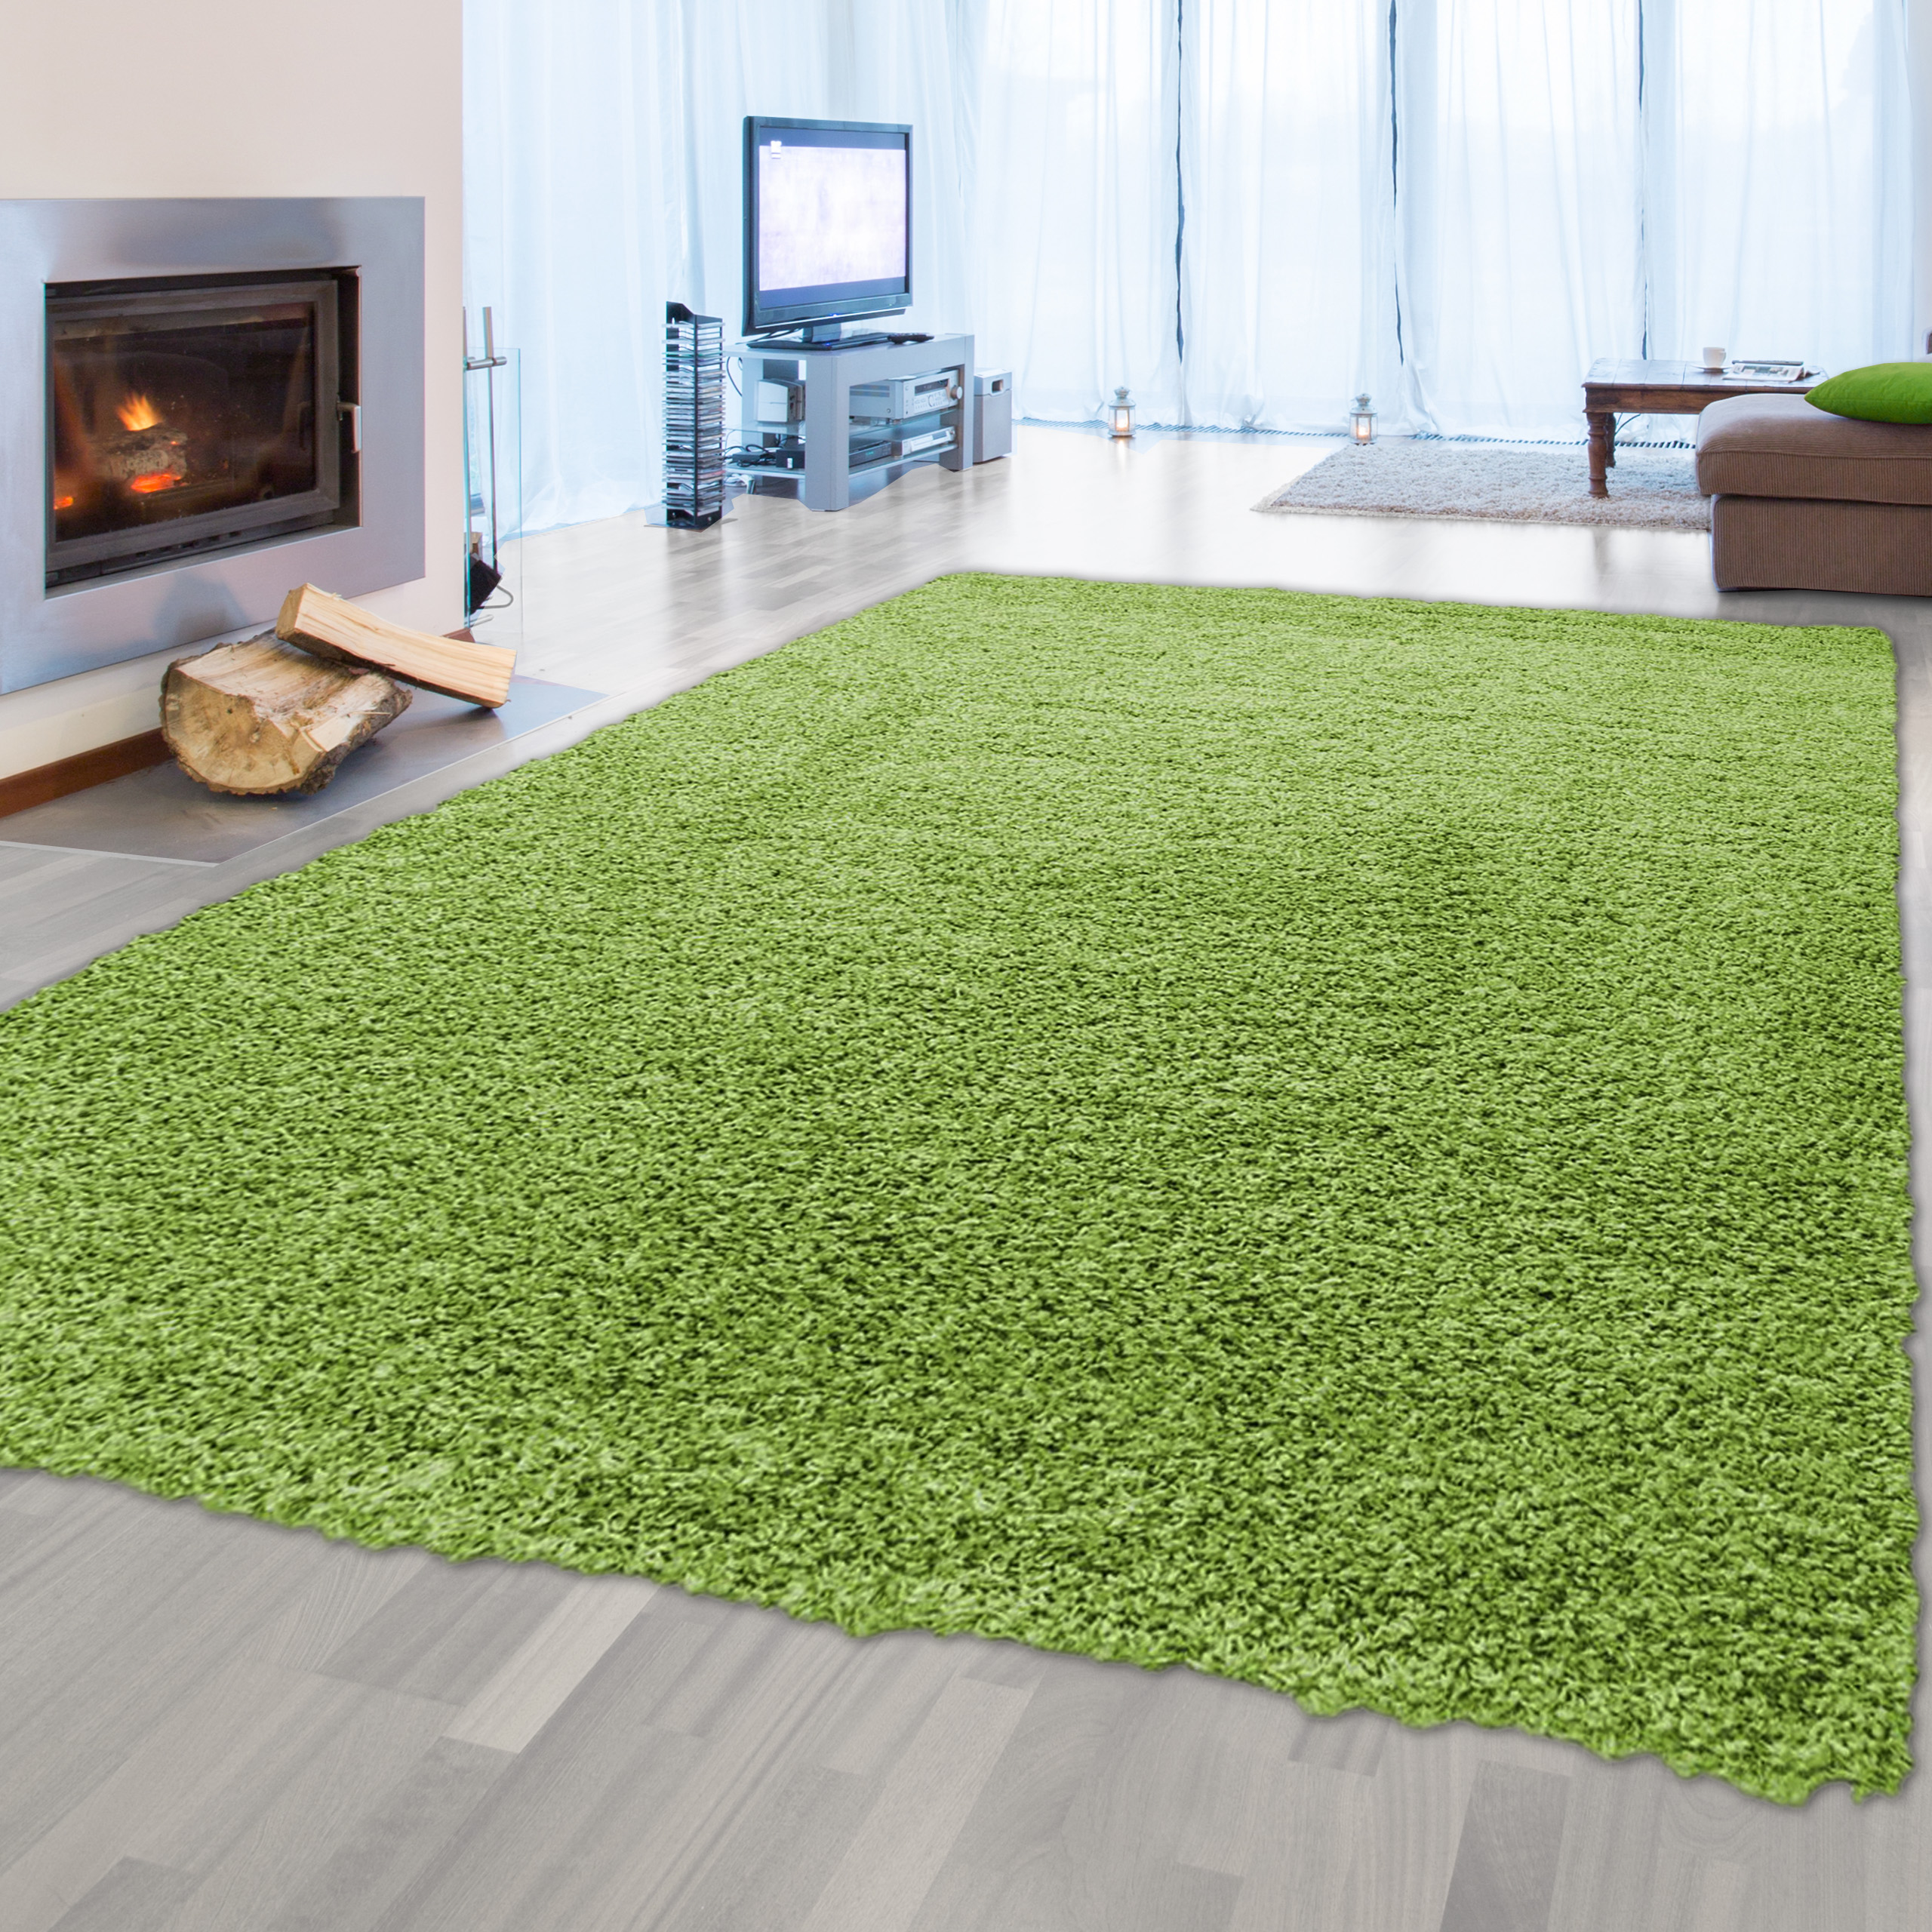 Shag carpet emission Merilon free (approx) (approx) frisee, overall 30mm m² gr - height Teppich-Traum / 2.2 weight 100% Total polypropylenes